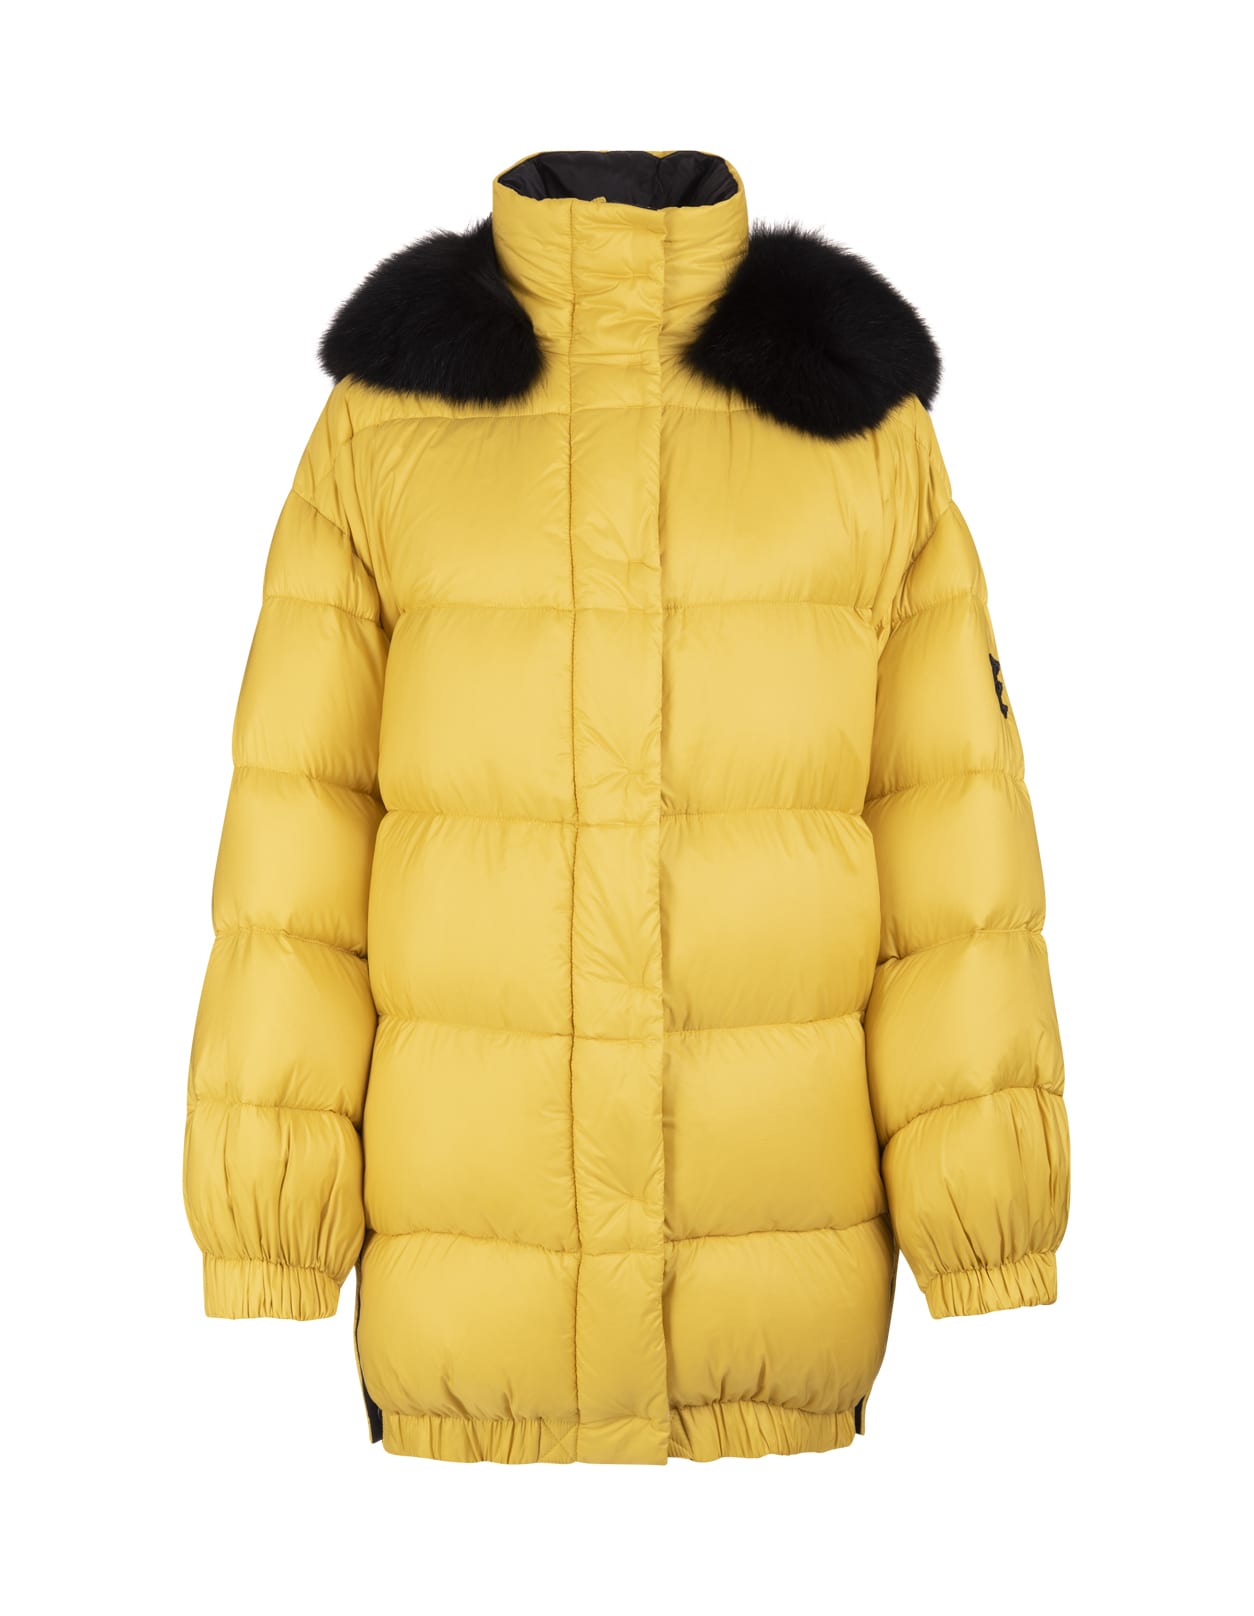 Ermanno Scervino Woman Yellow Long Down Jacket With Black Fox Fur Hood